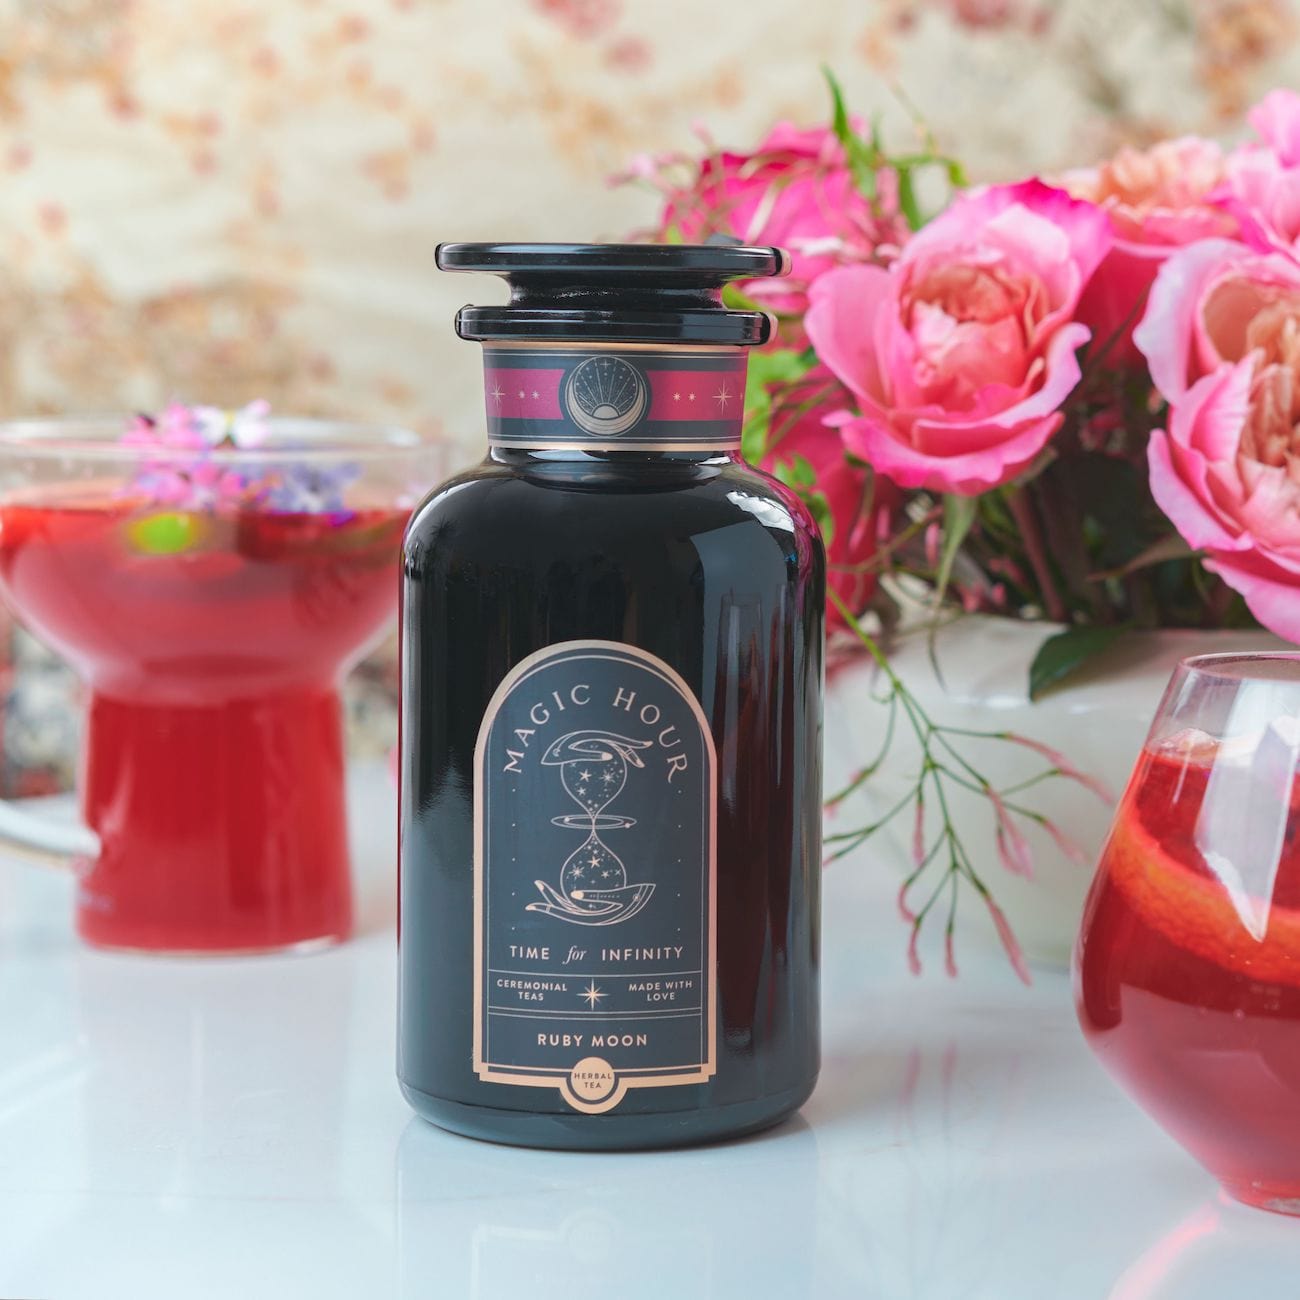 A dark glass bottle labeled "Club Magic Hour: Ruby Moon™ : Hibiscus Elderberry Tea" stands on a table. Next to it are two glasses containing red liquids with garnishes. In the background, a vase filled with vibrant, pink flowers adds a pop of color to the scene.